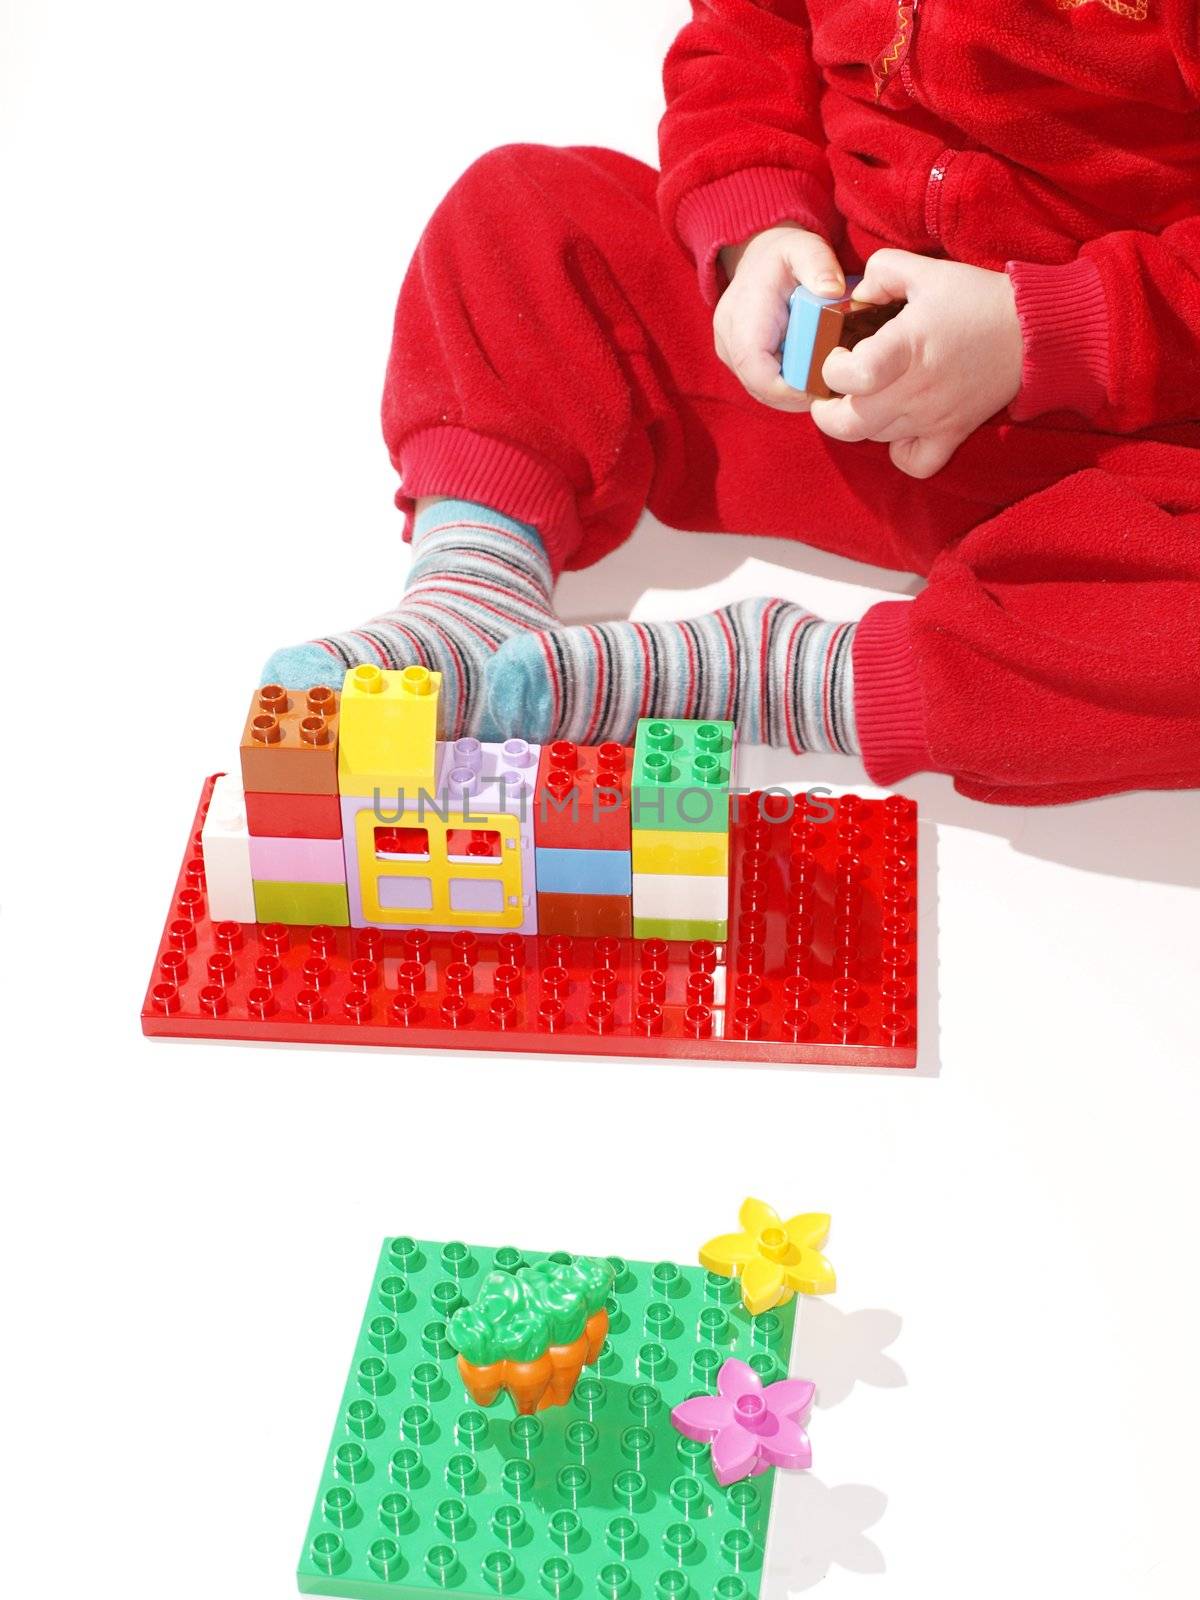 Unrecognizable kid in red, playing with colorful plastic quick build toys